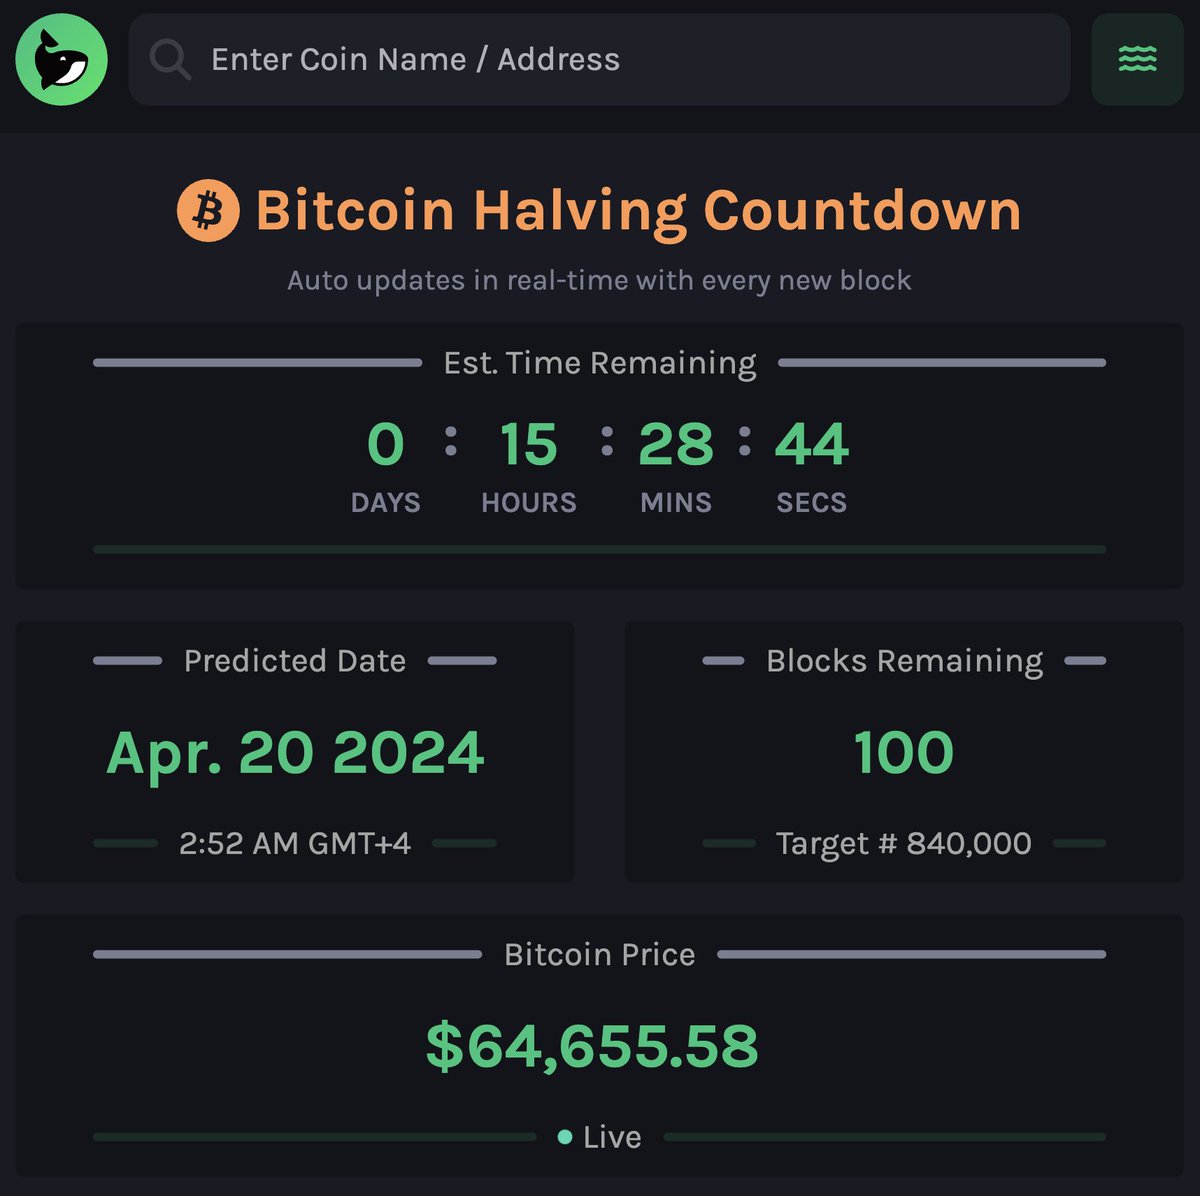 JUST IN: 100 blocks remain until #Bitcoin halving.